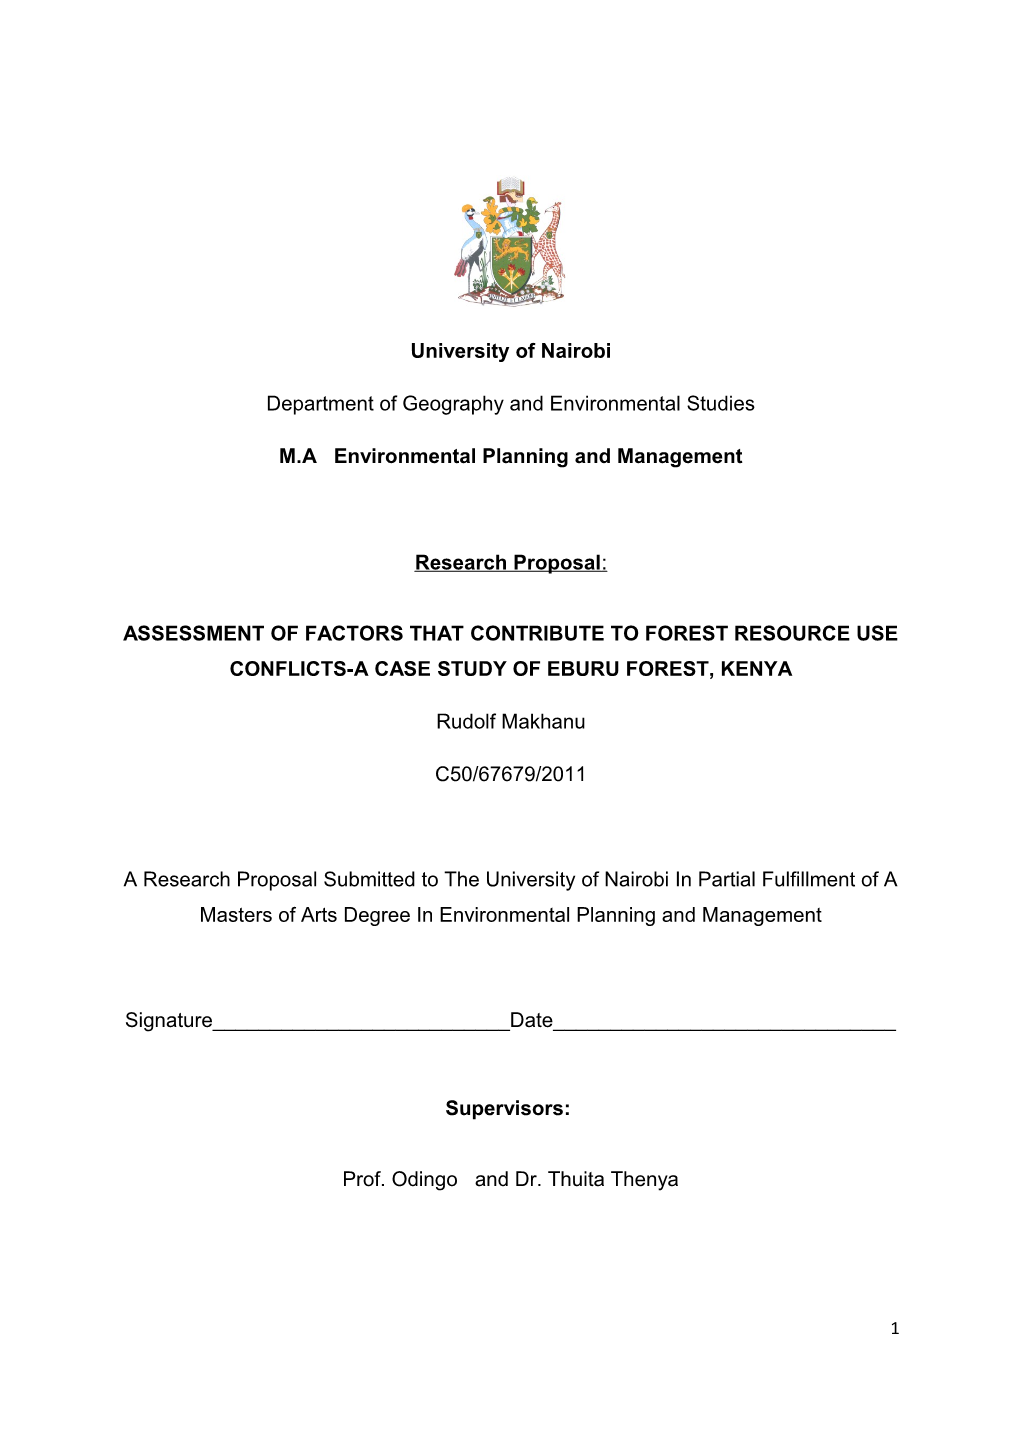 M.A Environmental Planning and Management